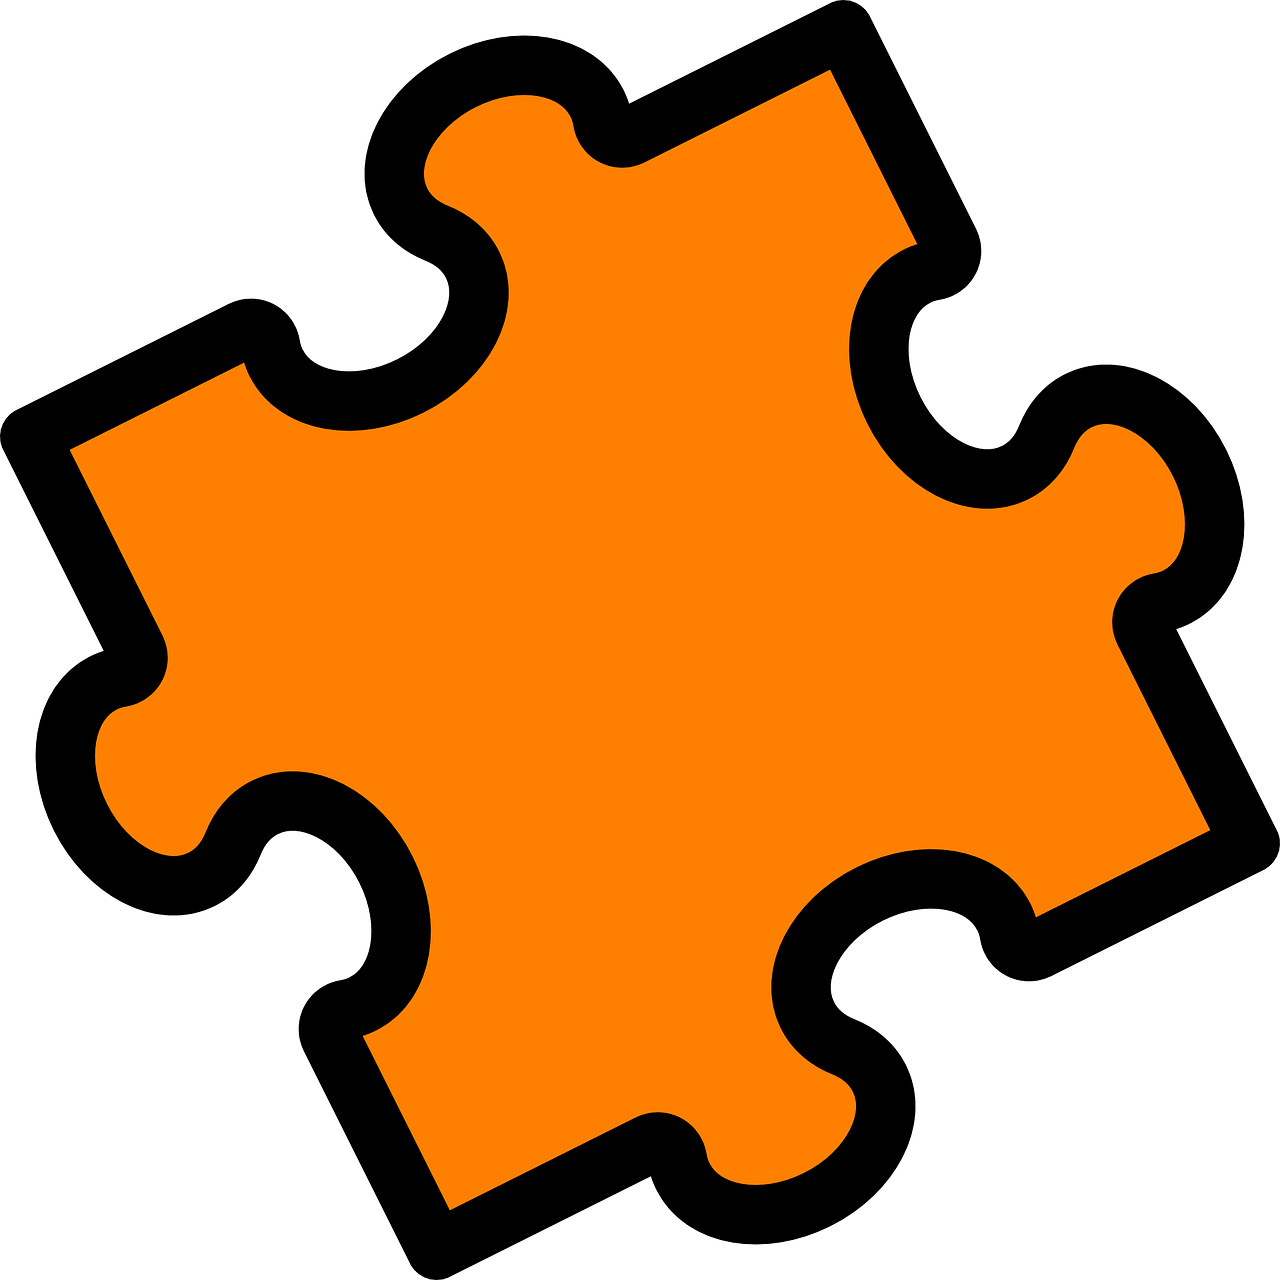 puzzle,jigsaw,piece,orange,solve,assemble,free vector graphics,free pictures, free photos, free images, royalty free, free illustrations, public domain